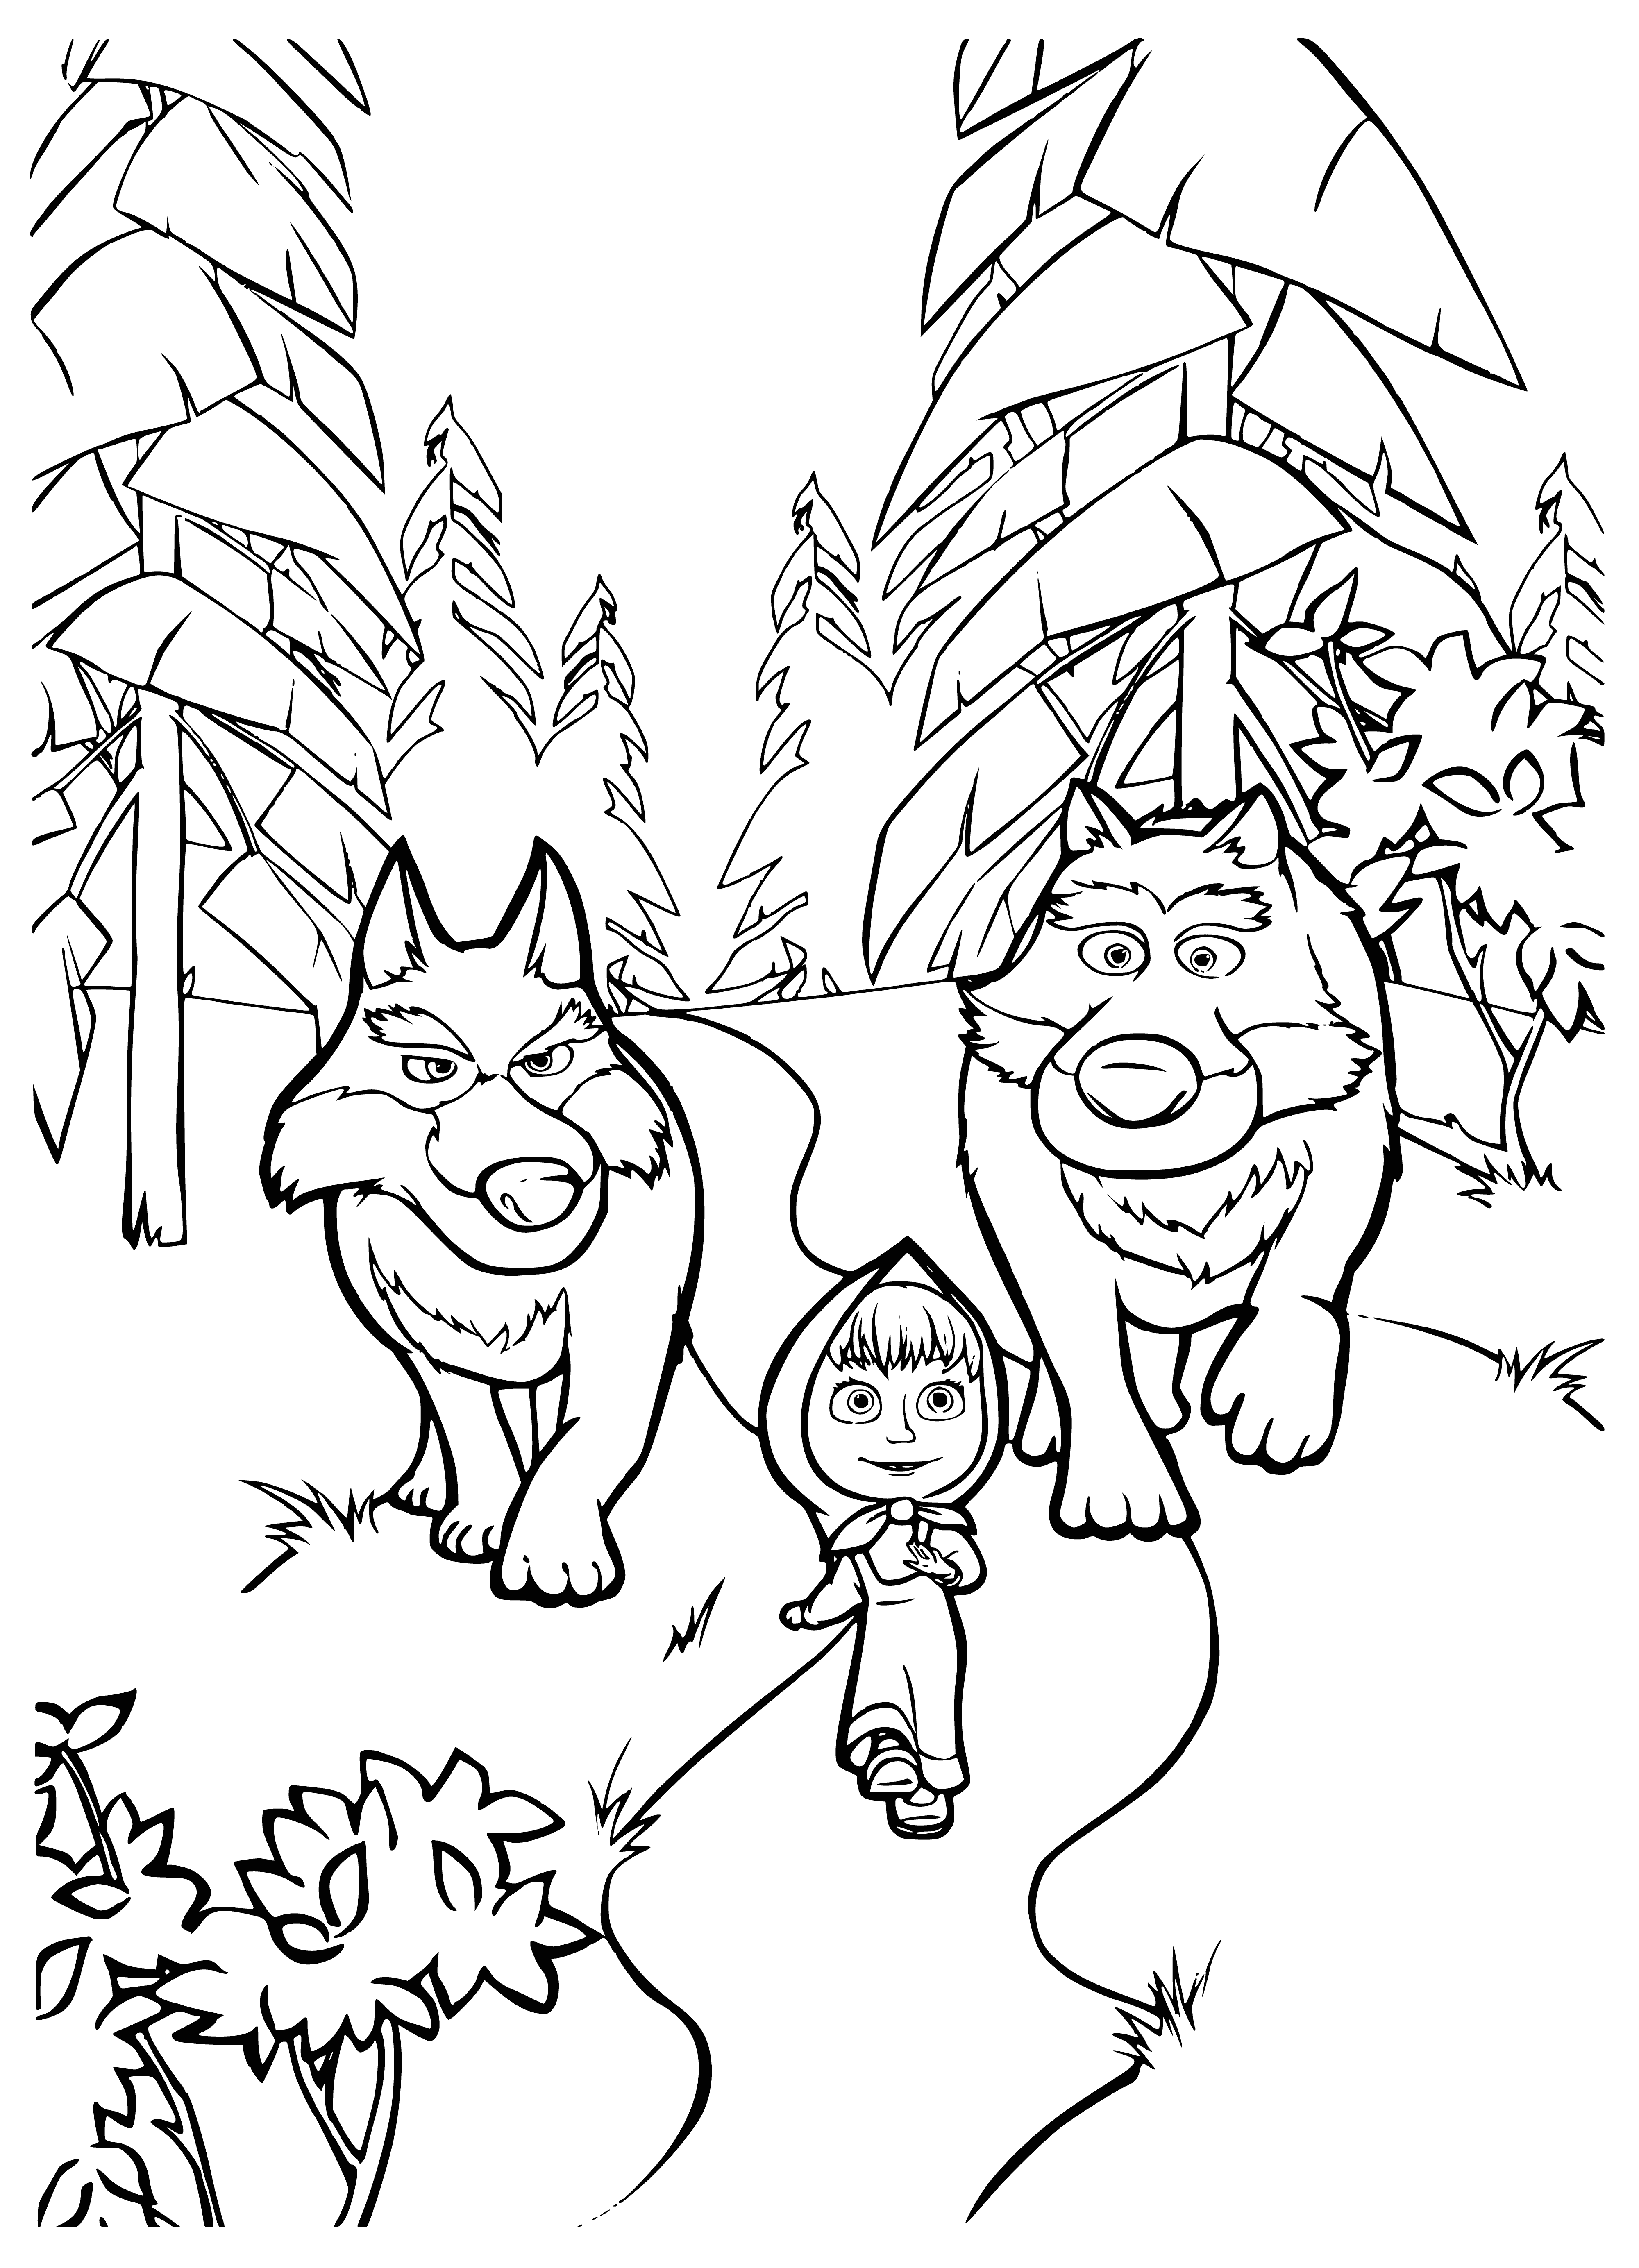 coloring page: Masha runs from a group of ravenous wolves.